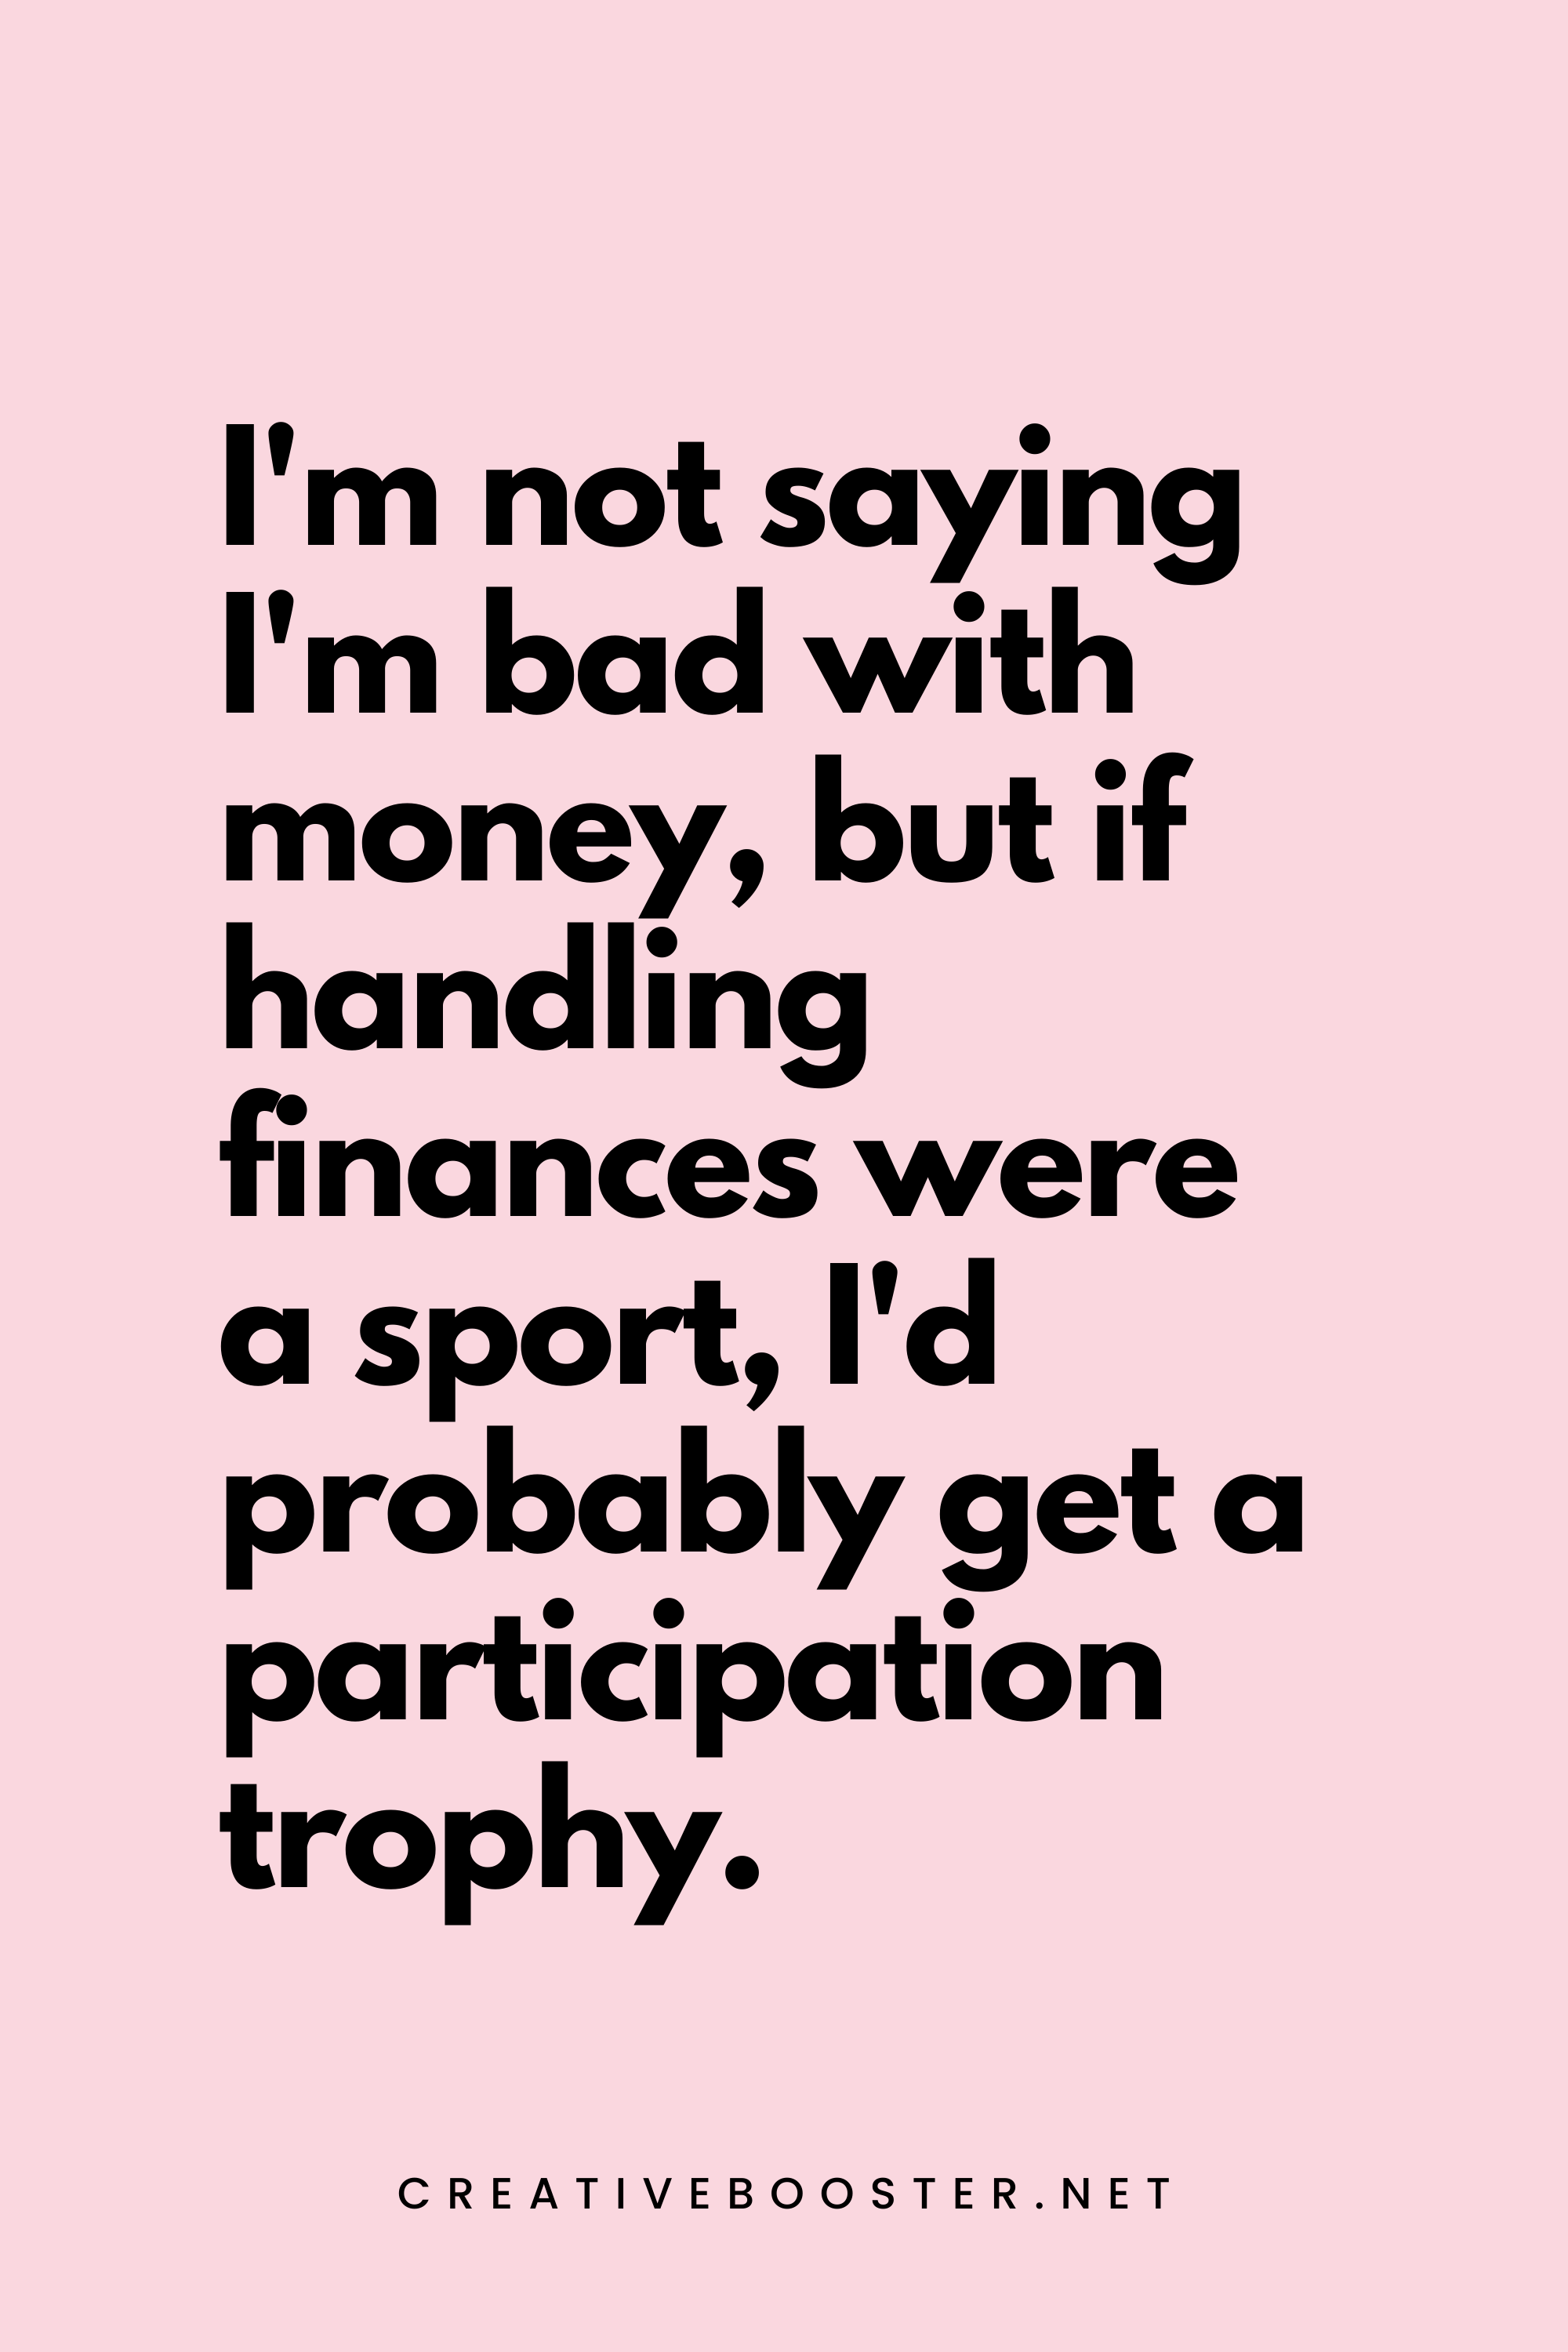 65. I'm not saying I'm bad with money, but if handling finances were a sport, I'd probably get a participation trophy. - Creativebooster.net - 6. Funny Financial Freedom Quotes